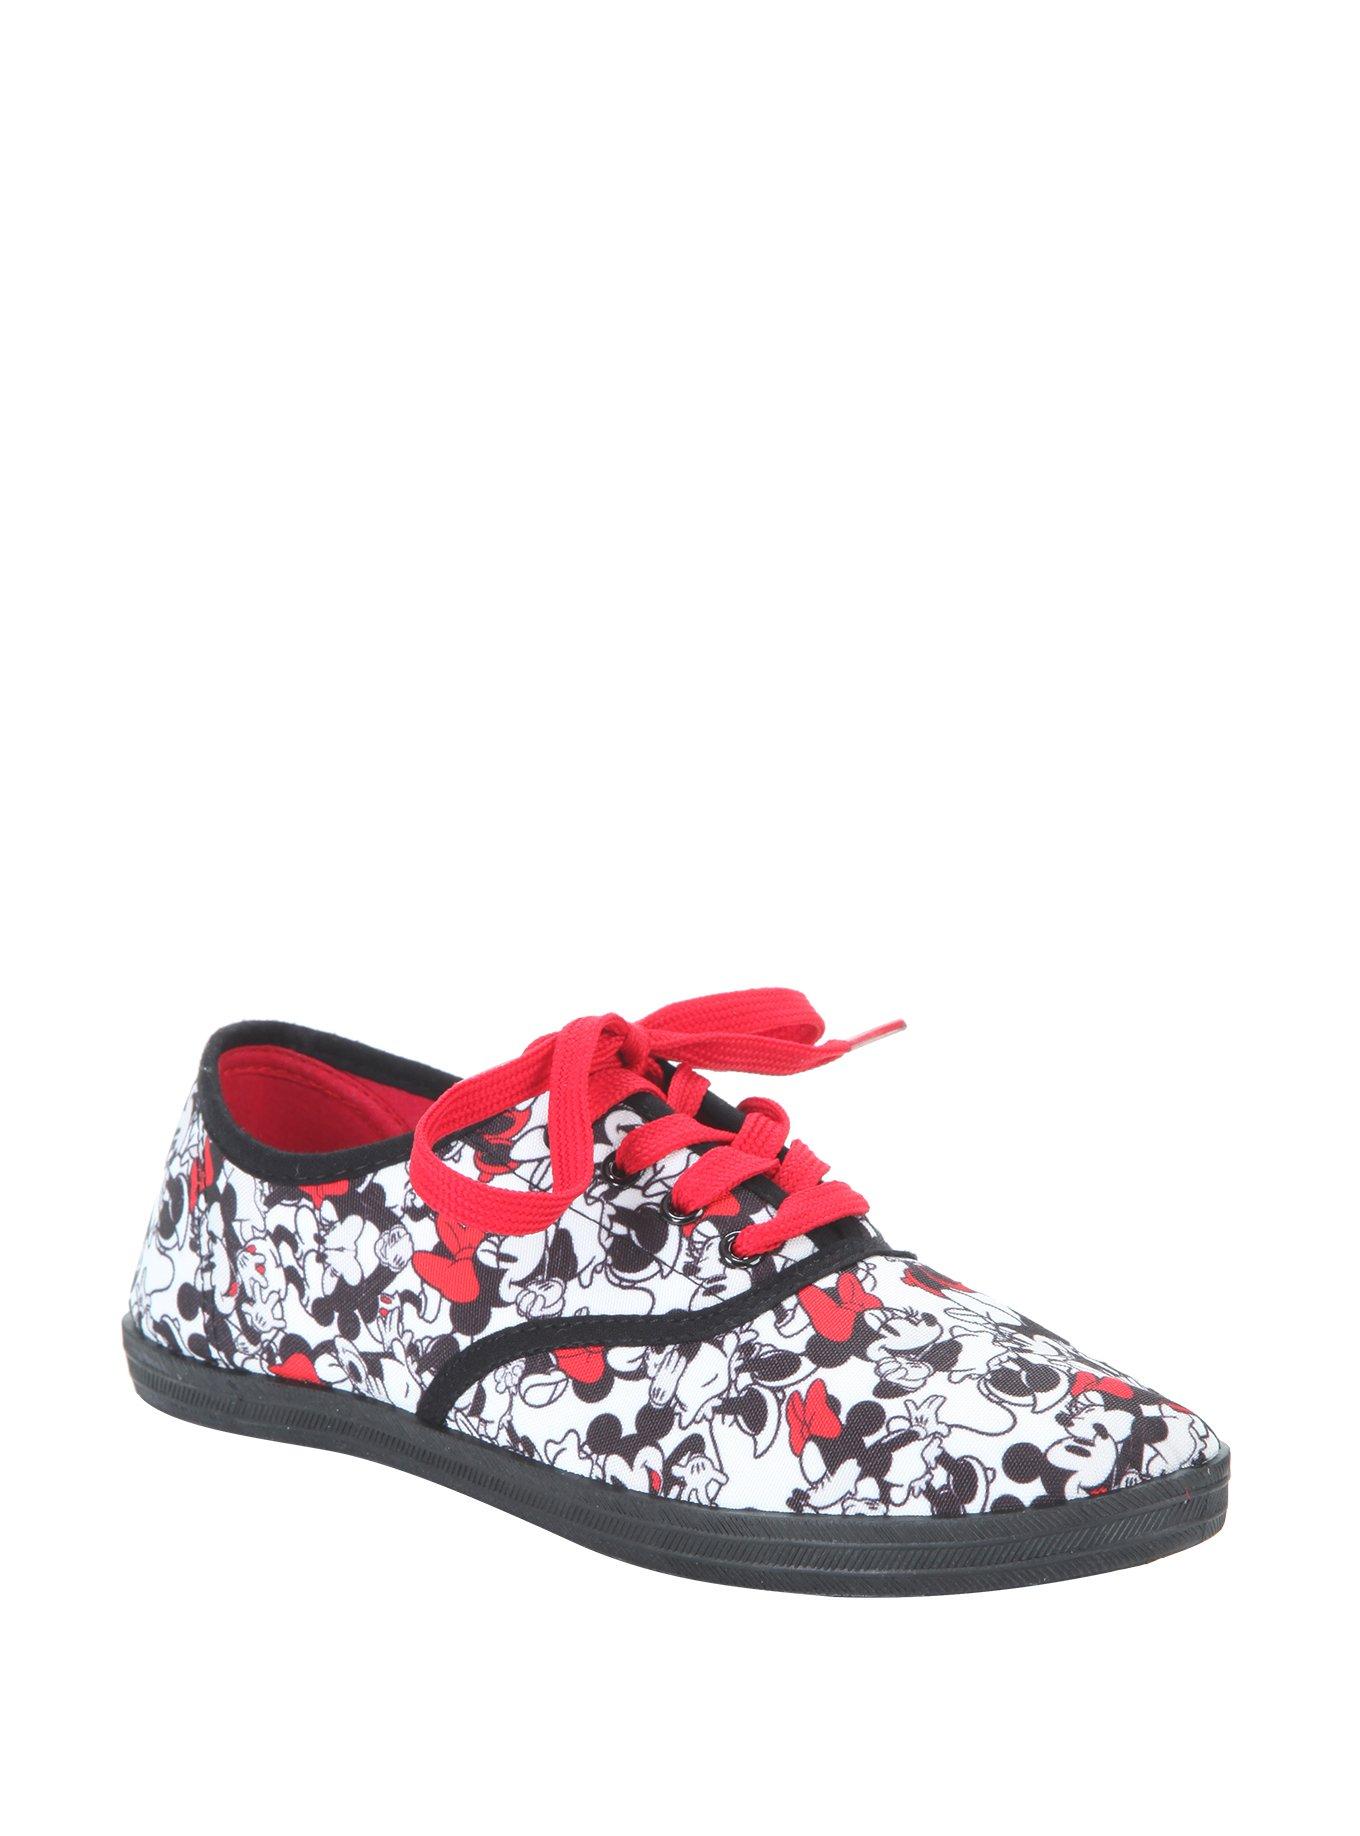 Disney Mickey & Minnie Mouse Lace-Up Sneakers, BLACK, hi-res